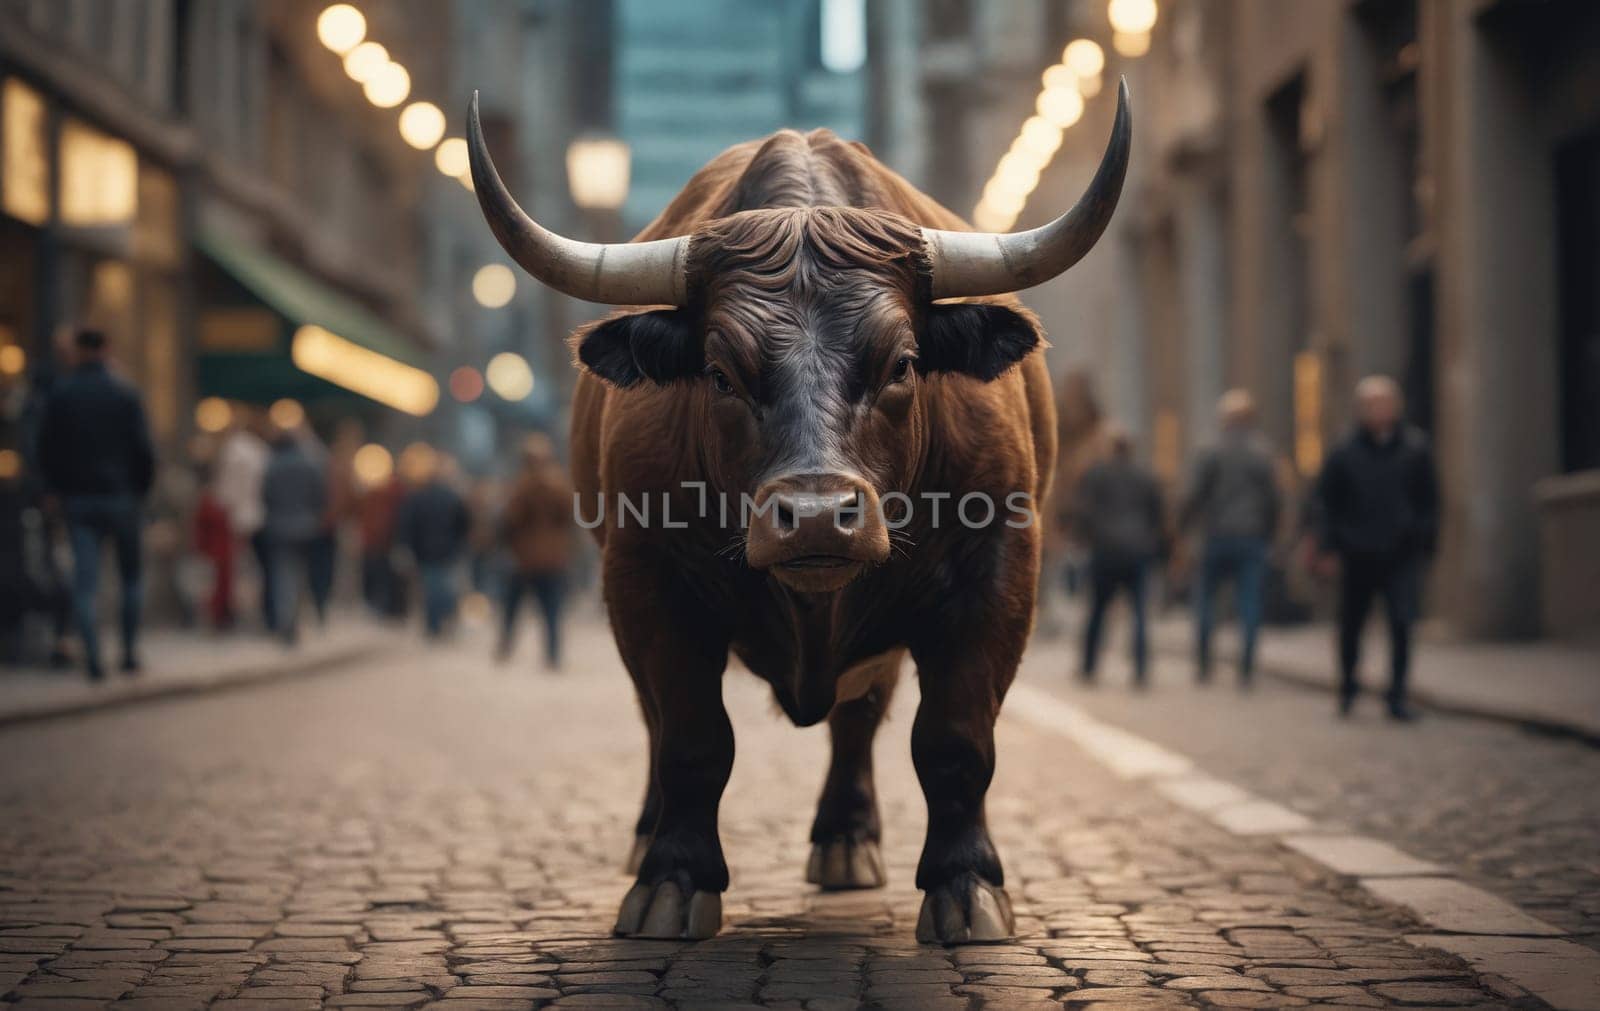 Bull on the Cobblestones: A Moment of Urban Wildlife Encounter by Andre1ns